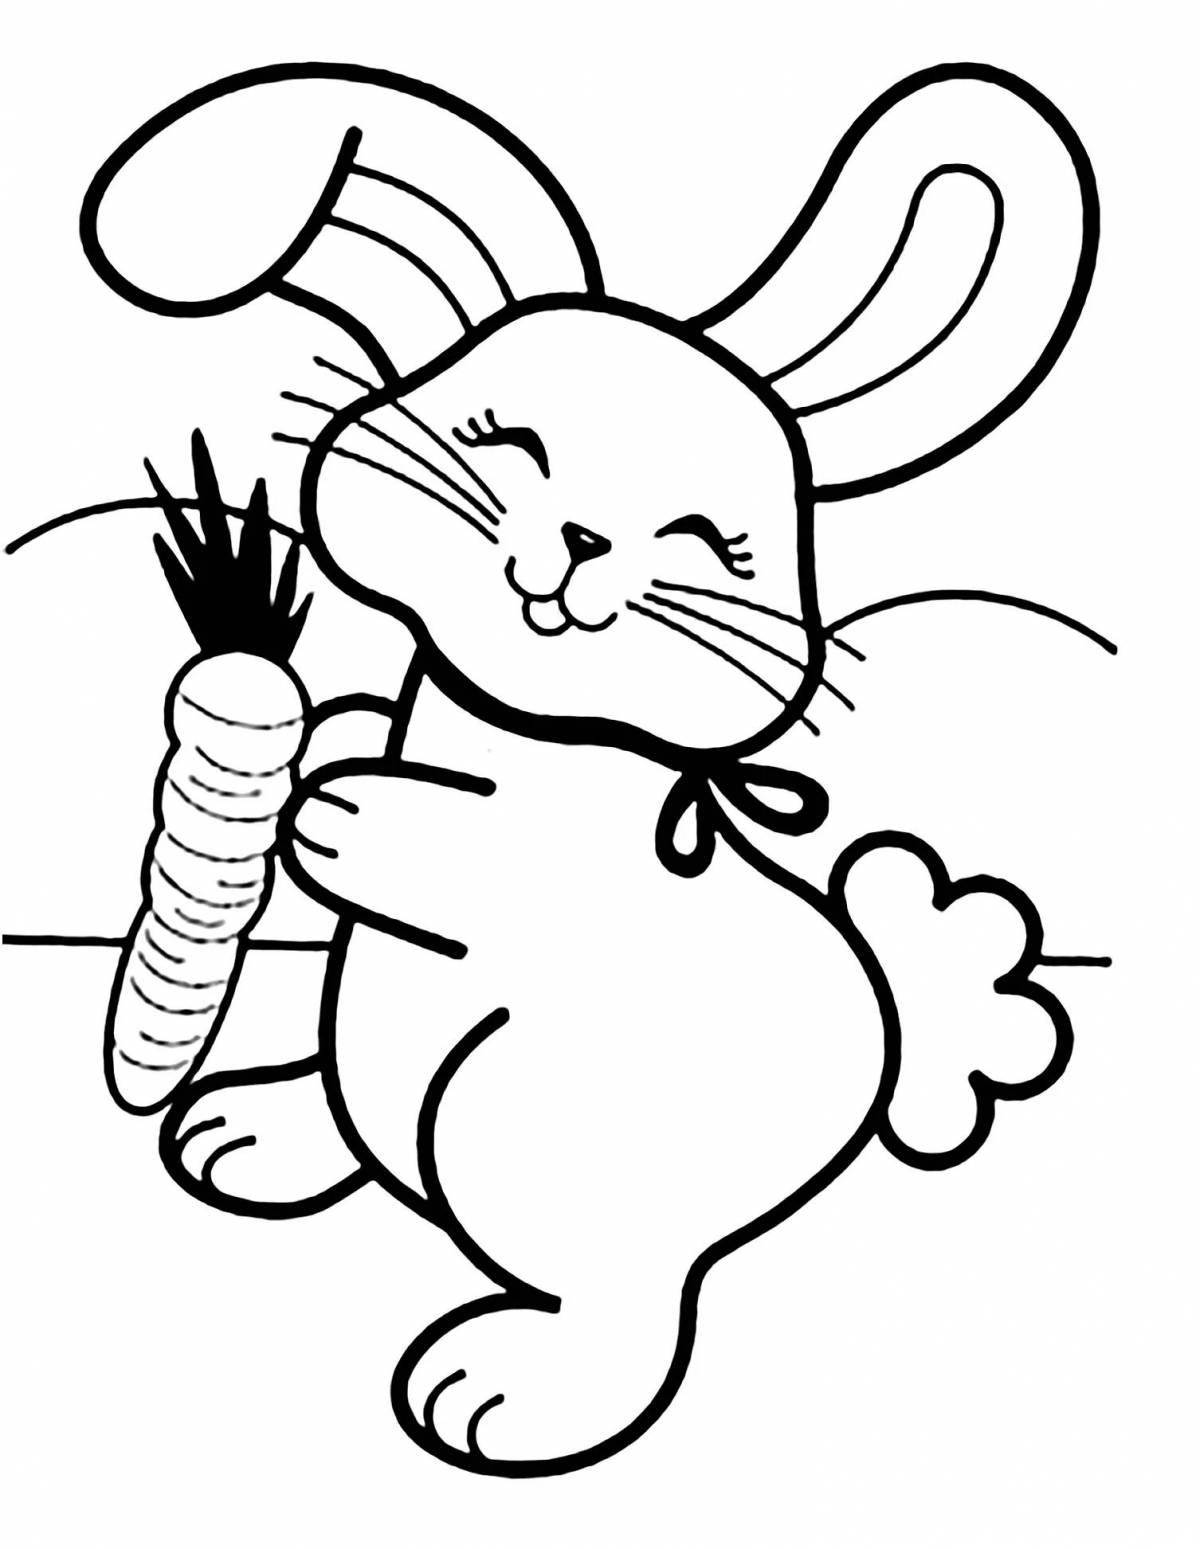 Coloring book joyful hare with carrots